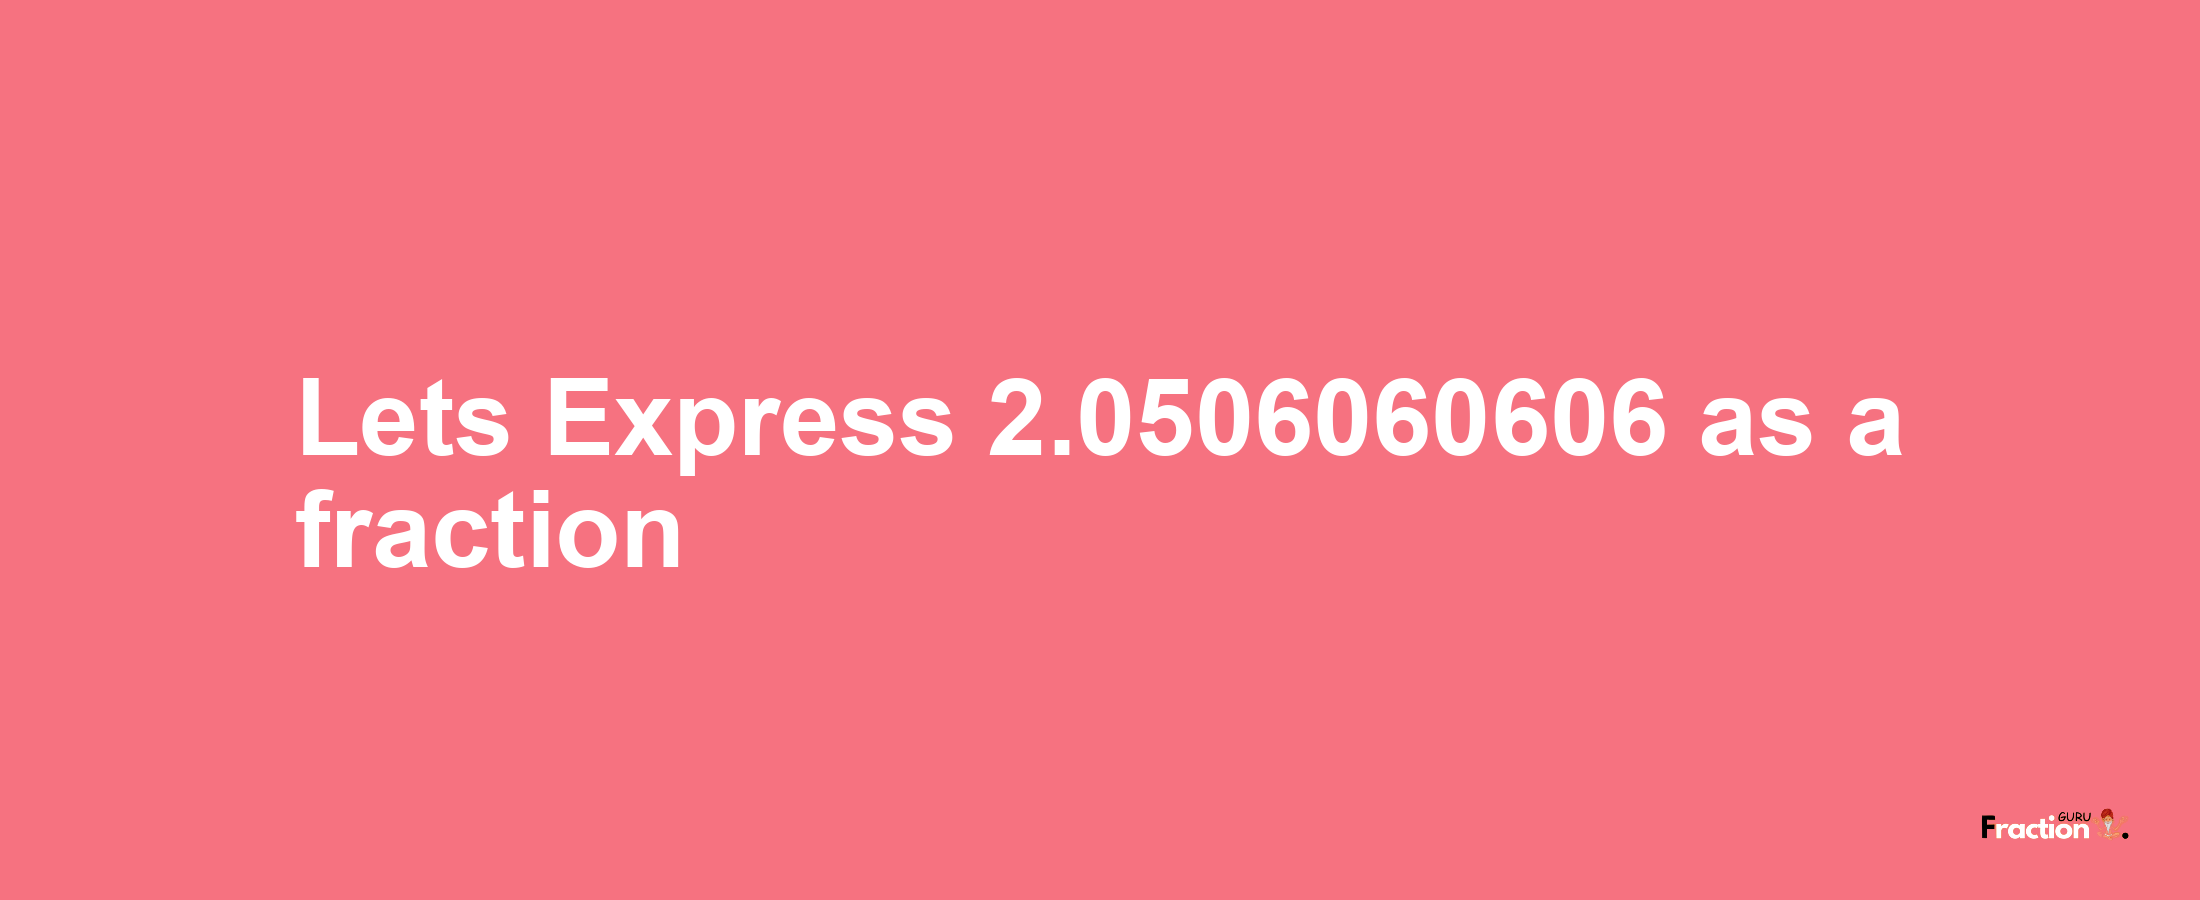 Lets Express 2.0506060606 as afraction